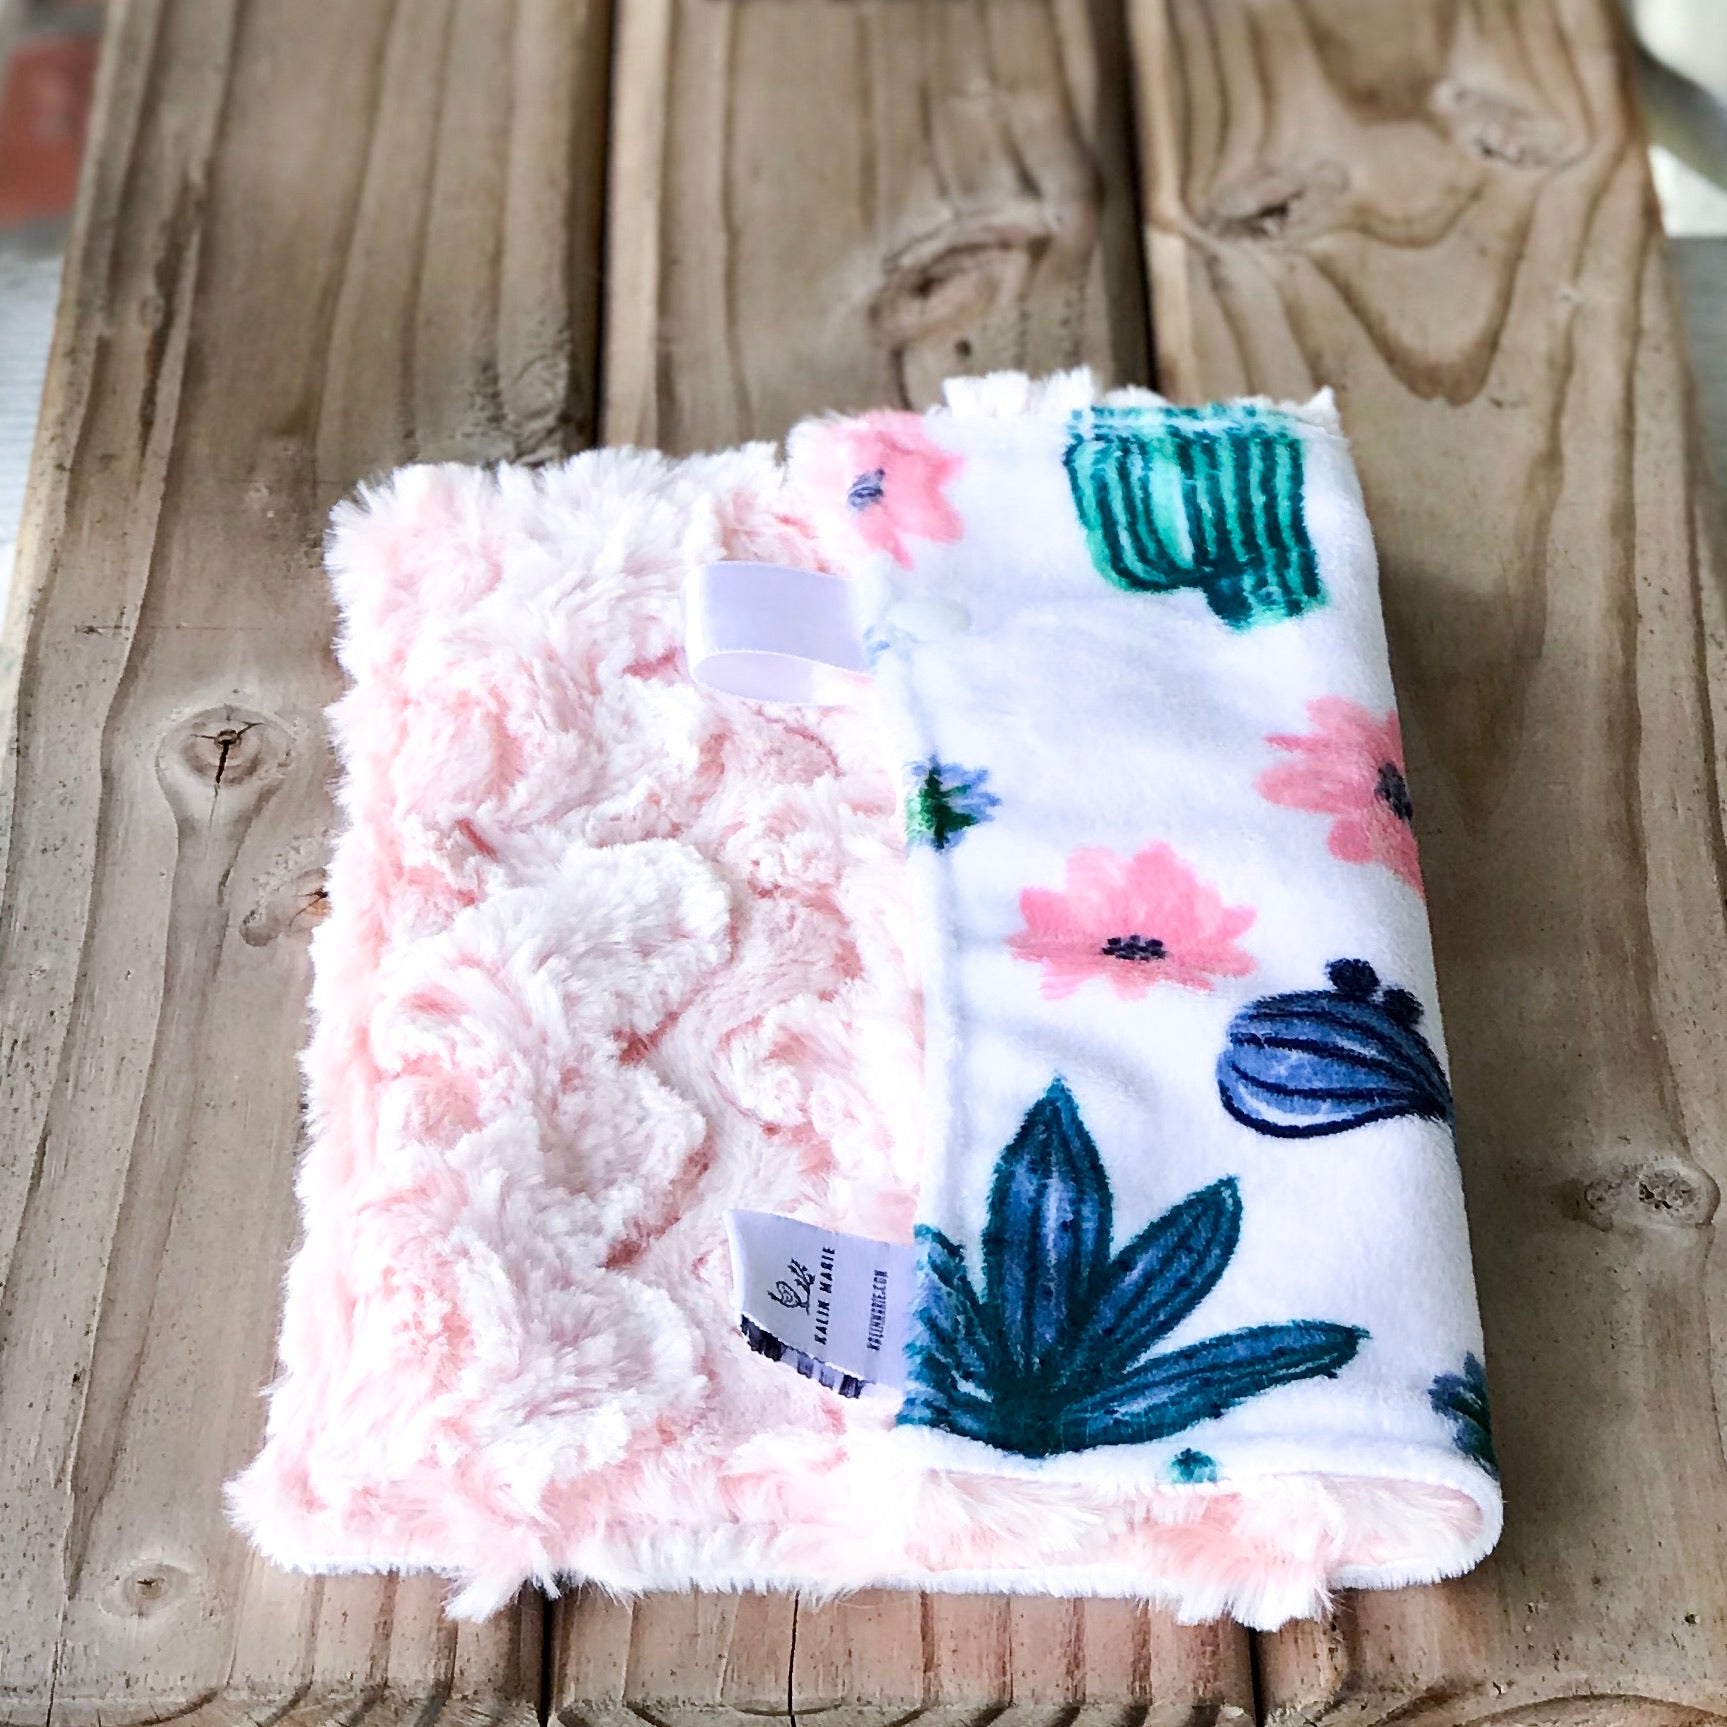 RTS Cactus Blooms Bluebell Luxe Snuggle Loveys